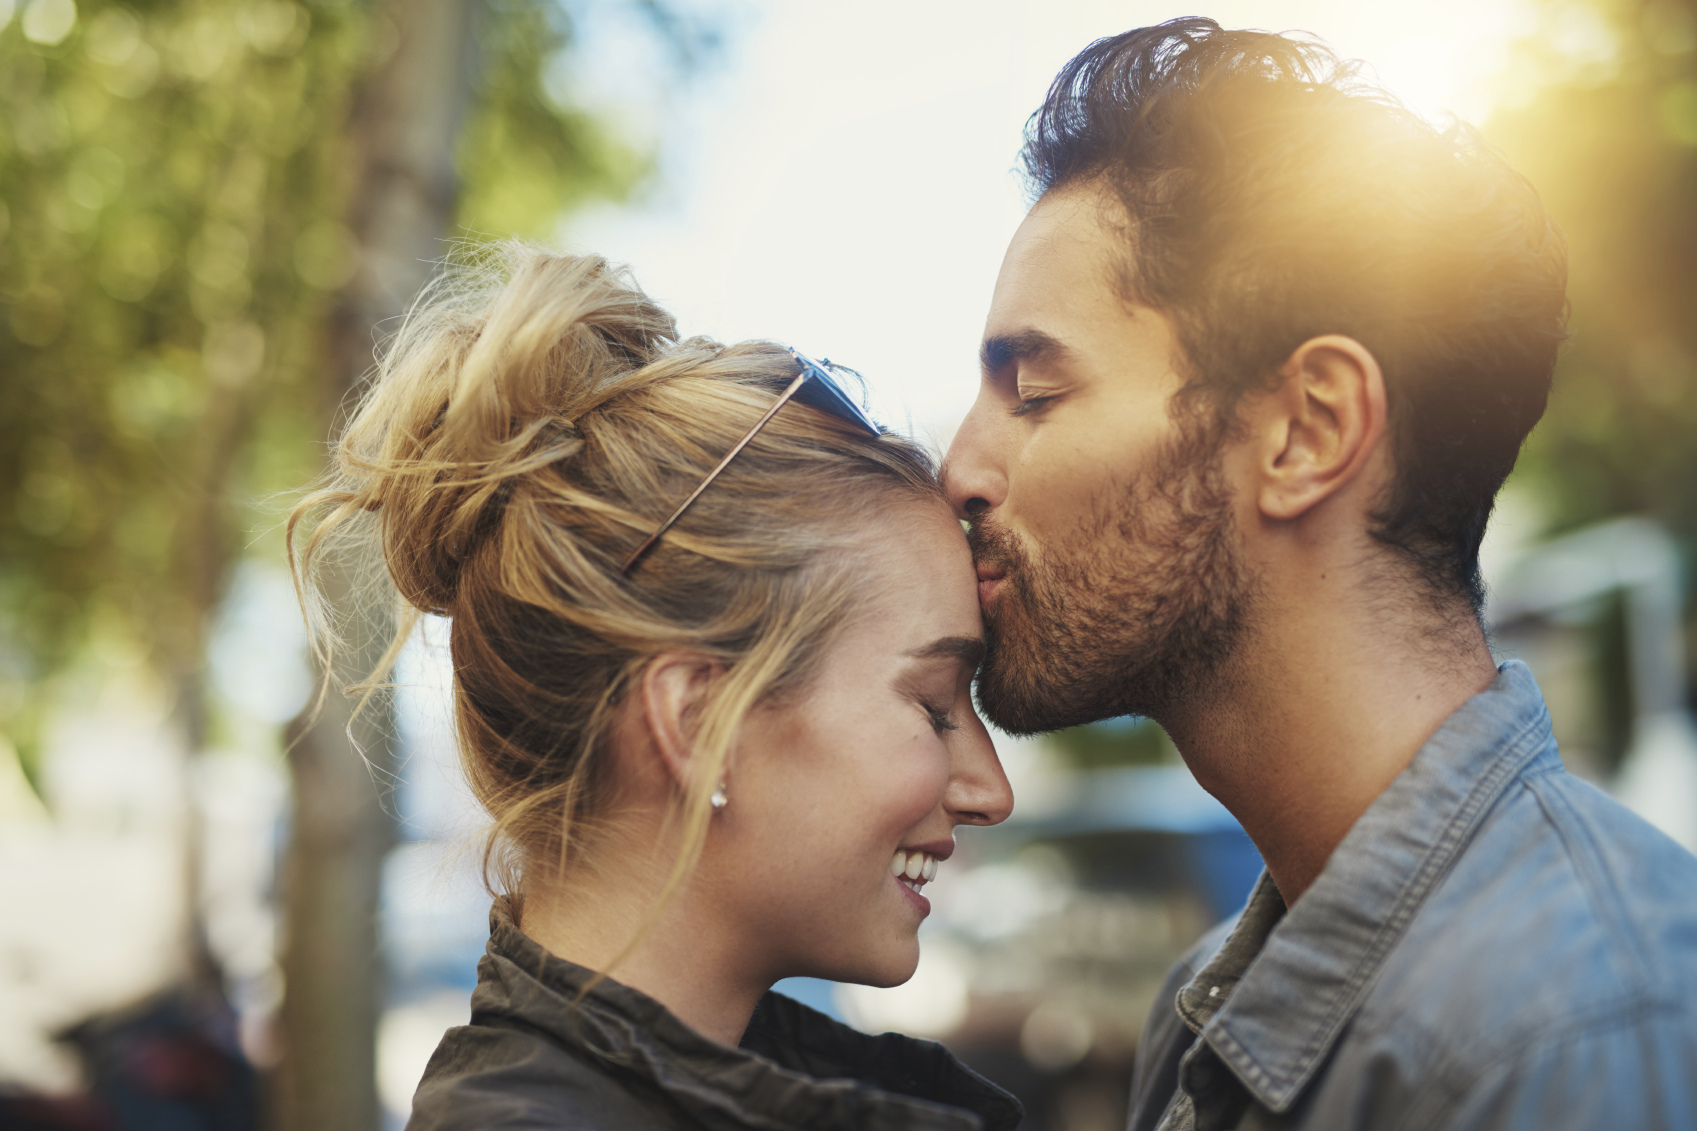 Dating With A Purpose: Why It’s Important To State Your Intentions From The Start